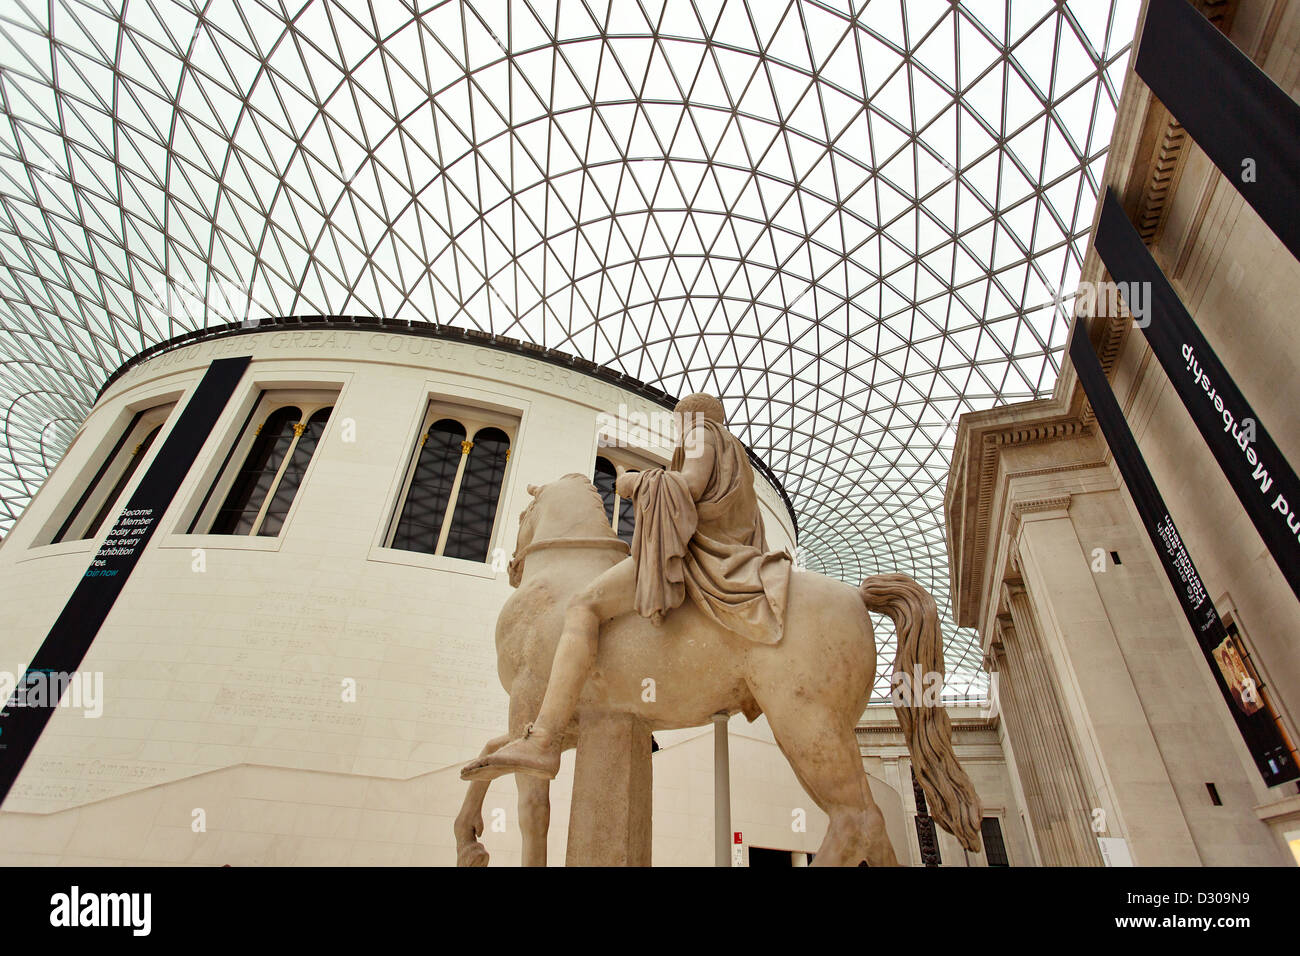 The Queen Elizabeth II Great Court at the British Museum. The Reading room and entrance hall. Stock Photo